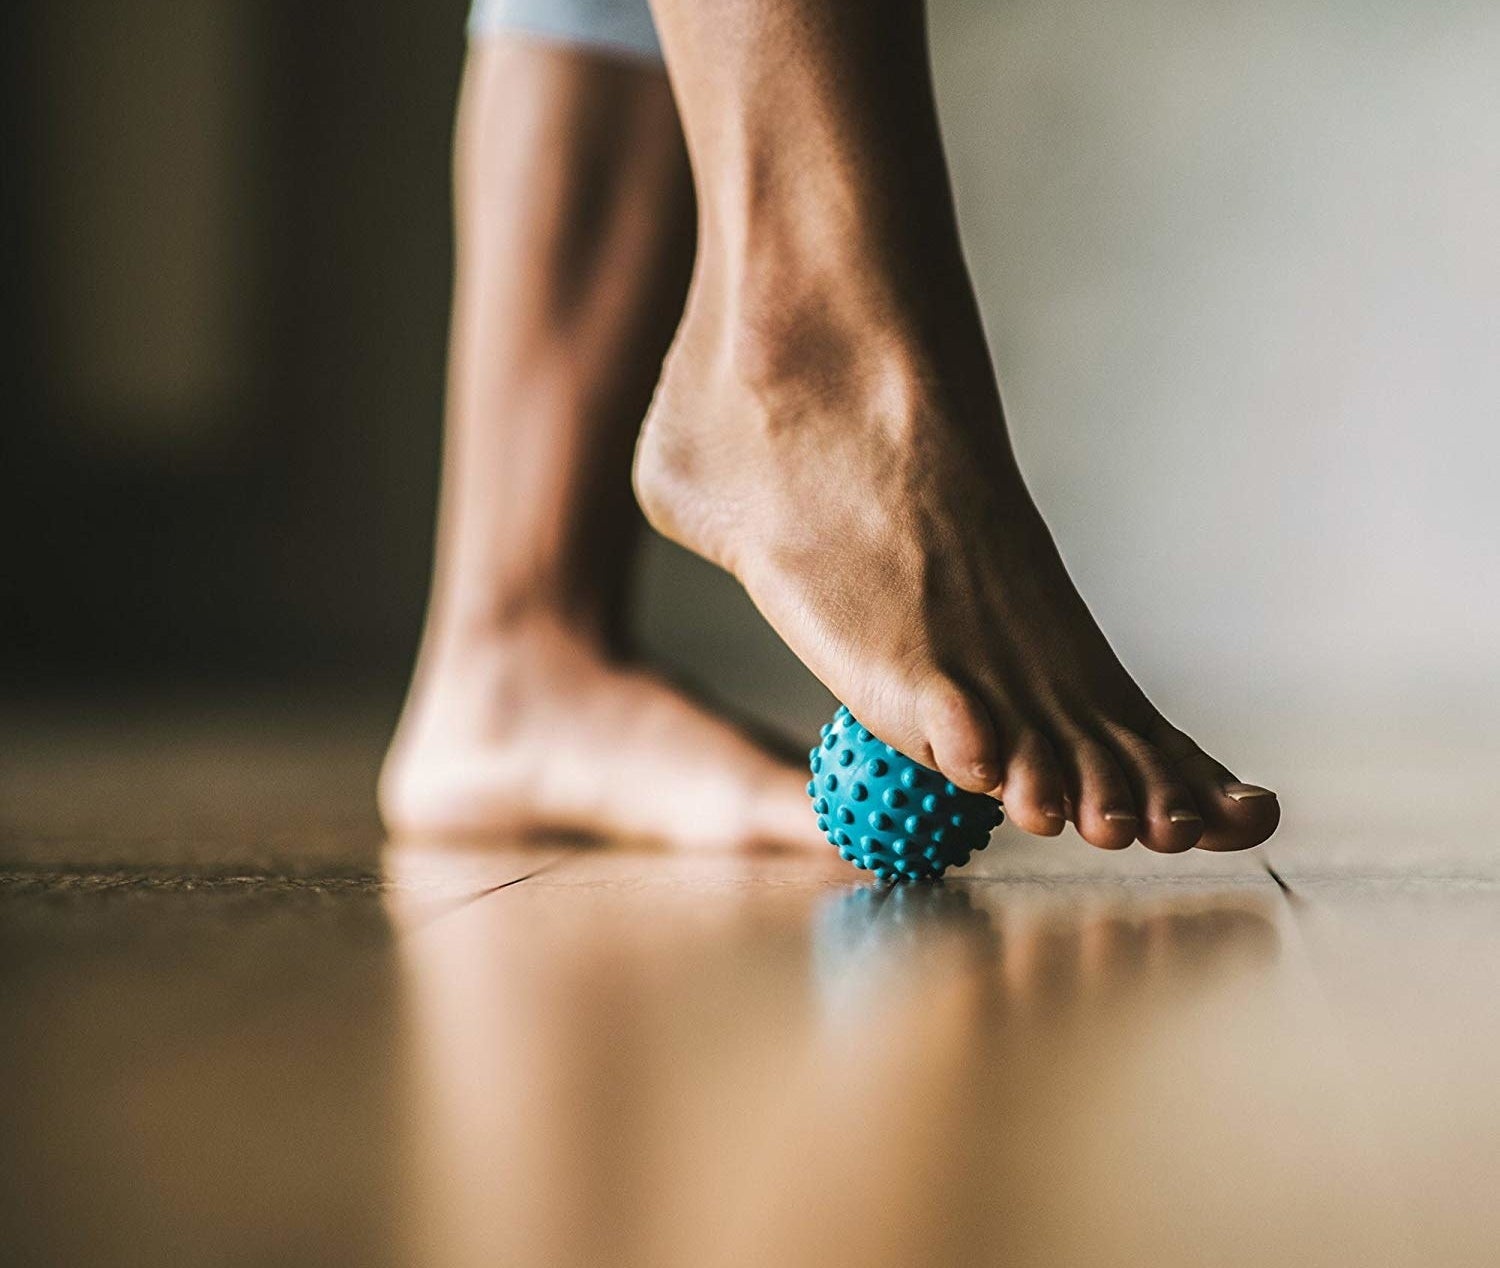 A person rolling their foot over a tiny spiky rubber ball